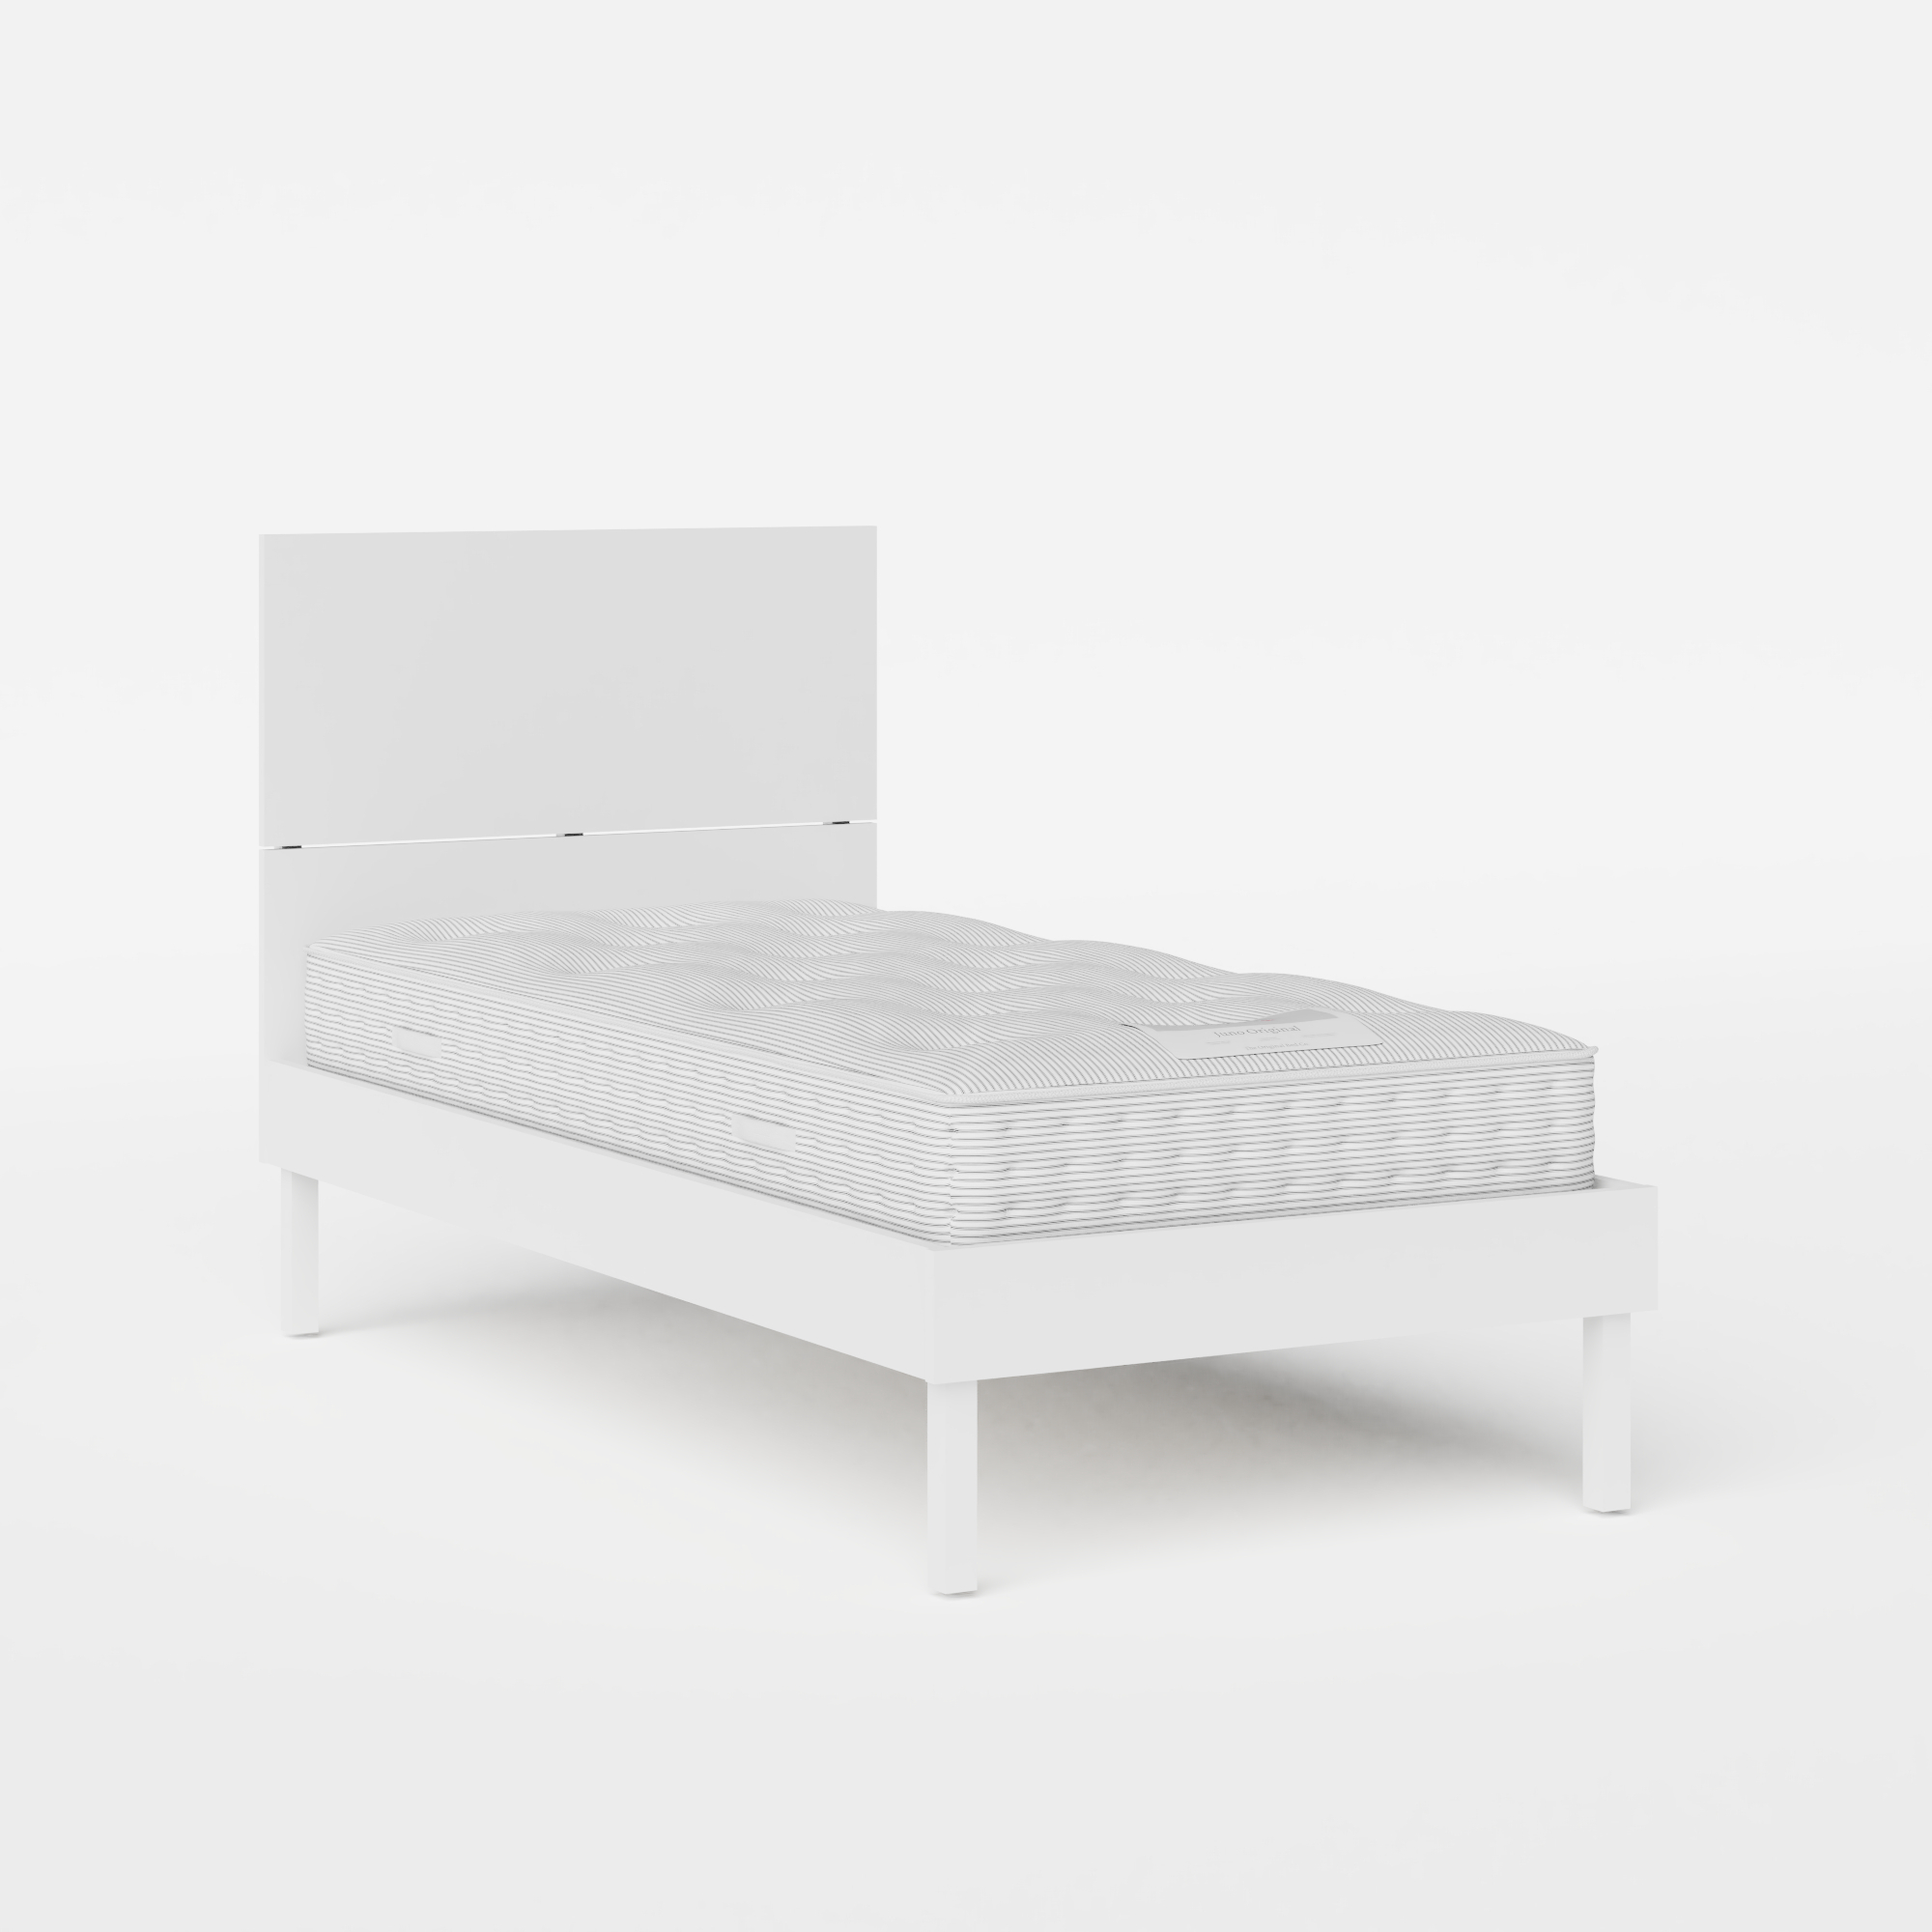 Misaki Painted single painted wood bed in white with Juno mattress